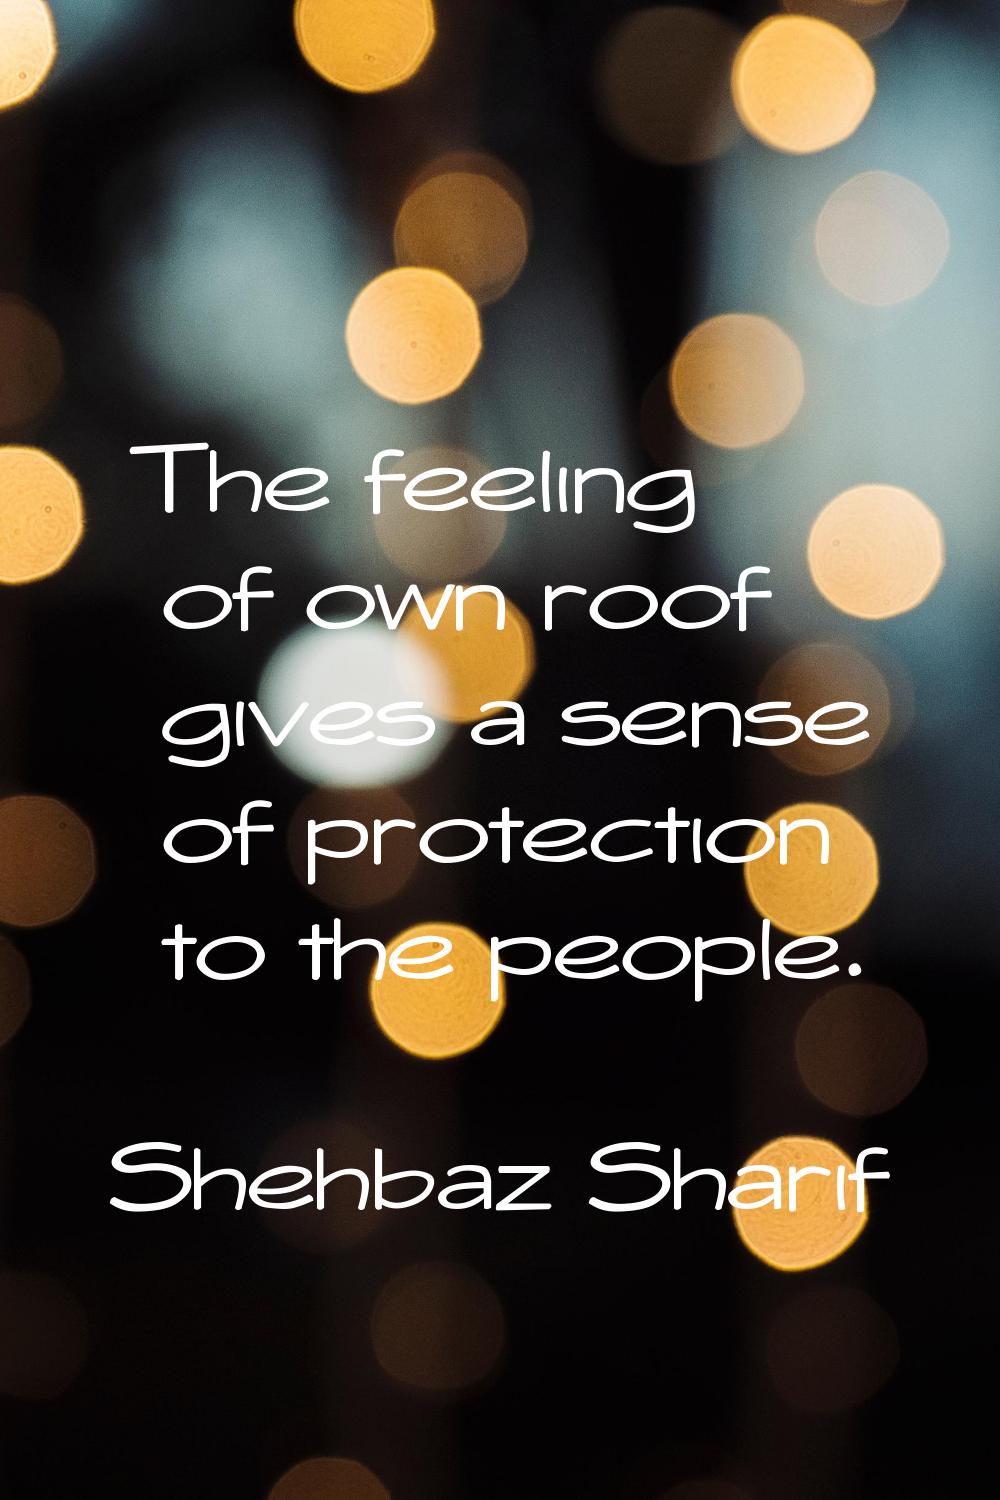 The feeling of own roof gives a sense of protection to the people.